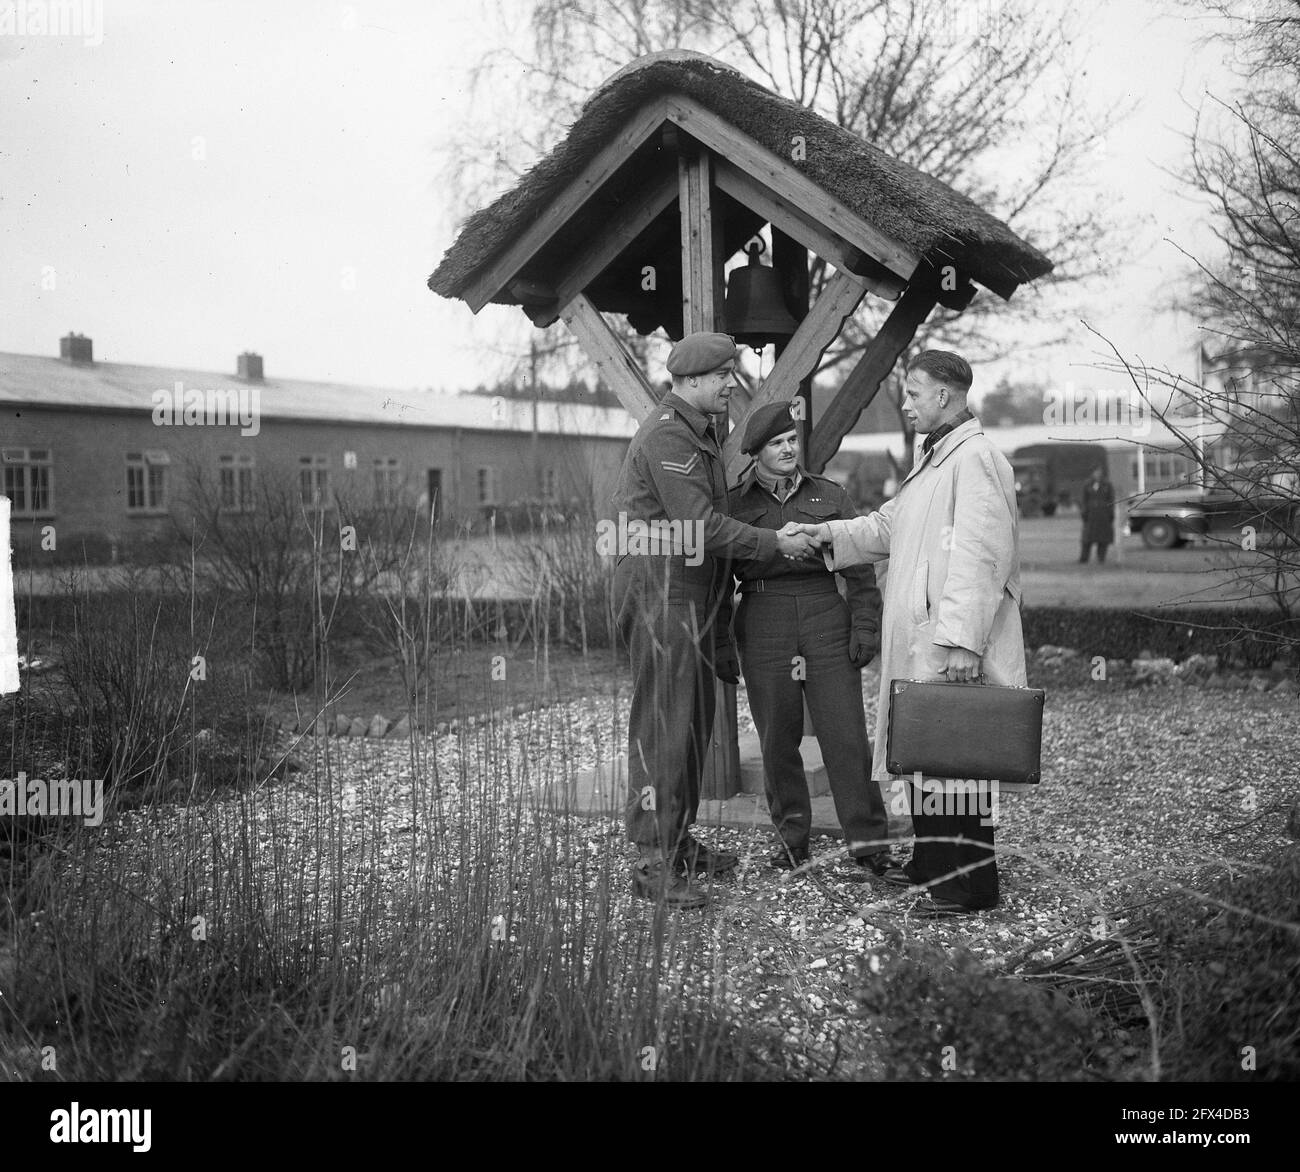 Demobilization camp Boskamp Amersfoort, January 13, 1950, demobilization centers, The Netherlands, 20th century press agency photo, news to remember, documentary, historic photography 1945-1990, visual stories, human history of the Twentieth Century, capturing moments in time Stock Photo